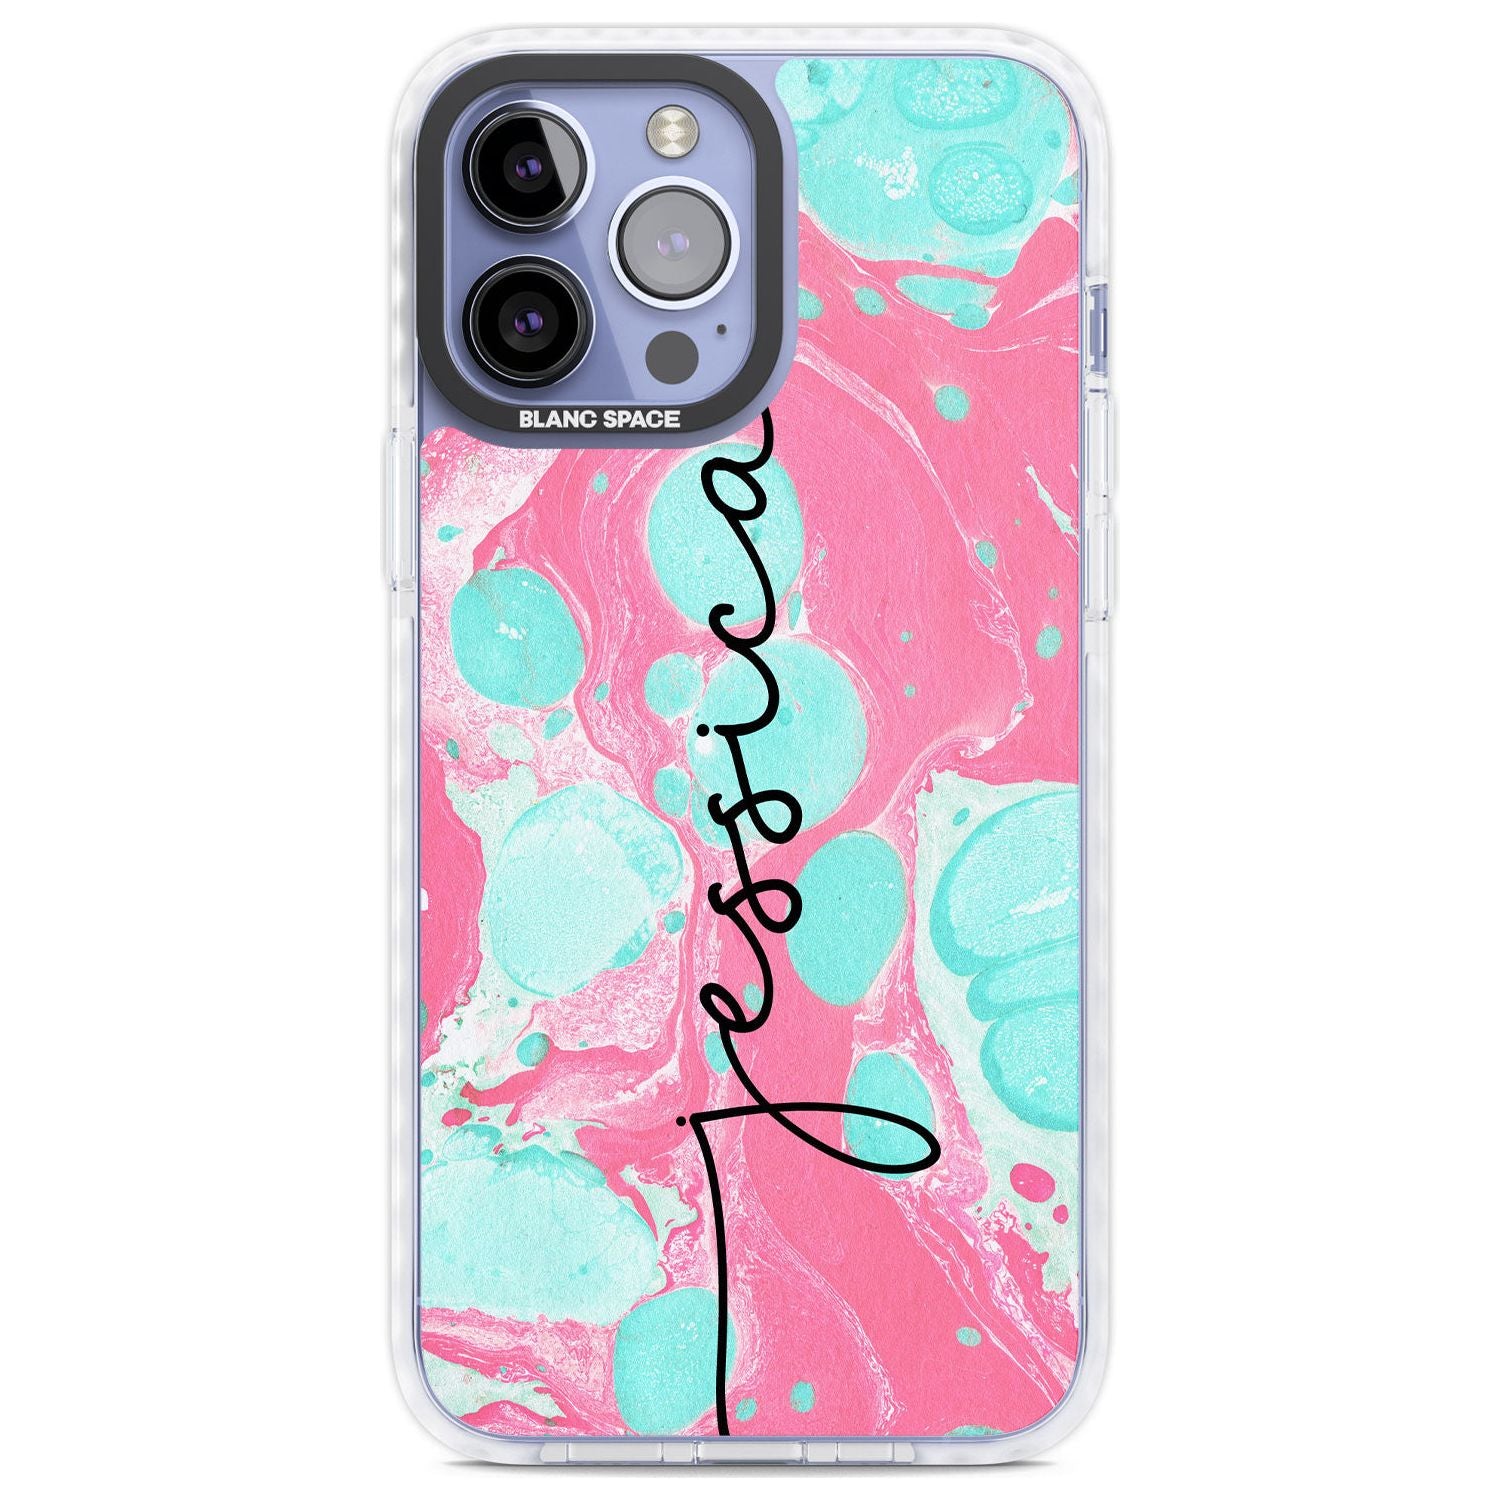 Personalised Turquoise & Pink - Marbled Custom Phone Case iPhone 13 Pro Max / Impact Case,iPhone 14 Pro Max / Impact Case Blanc Space